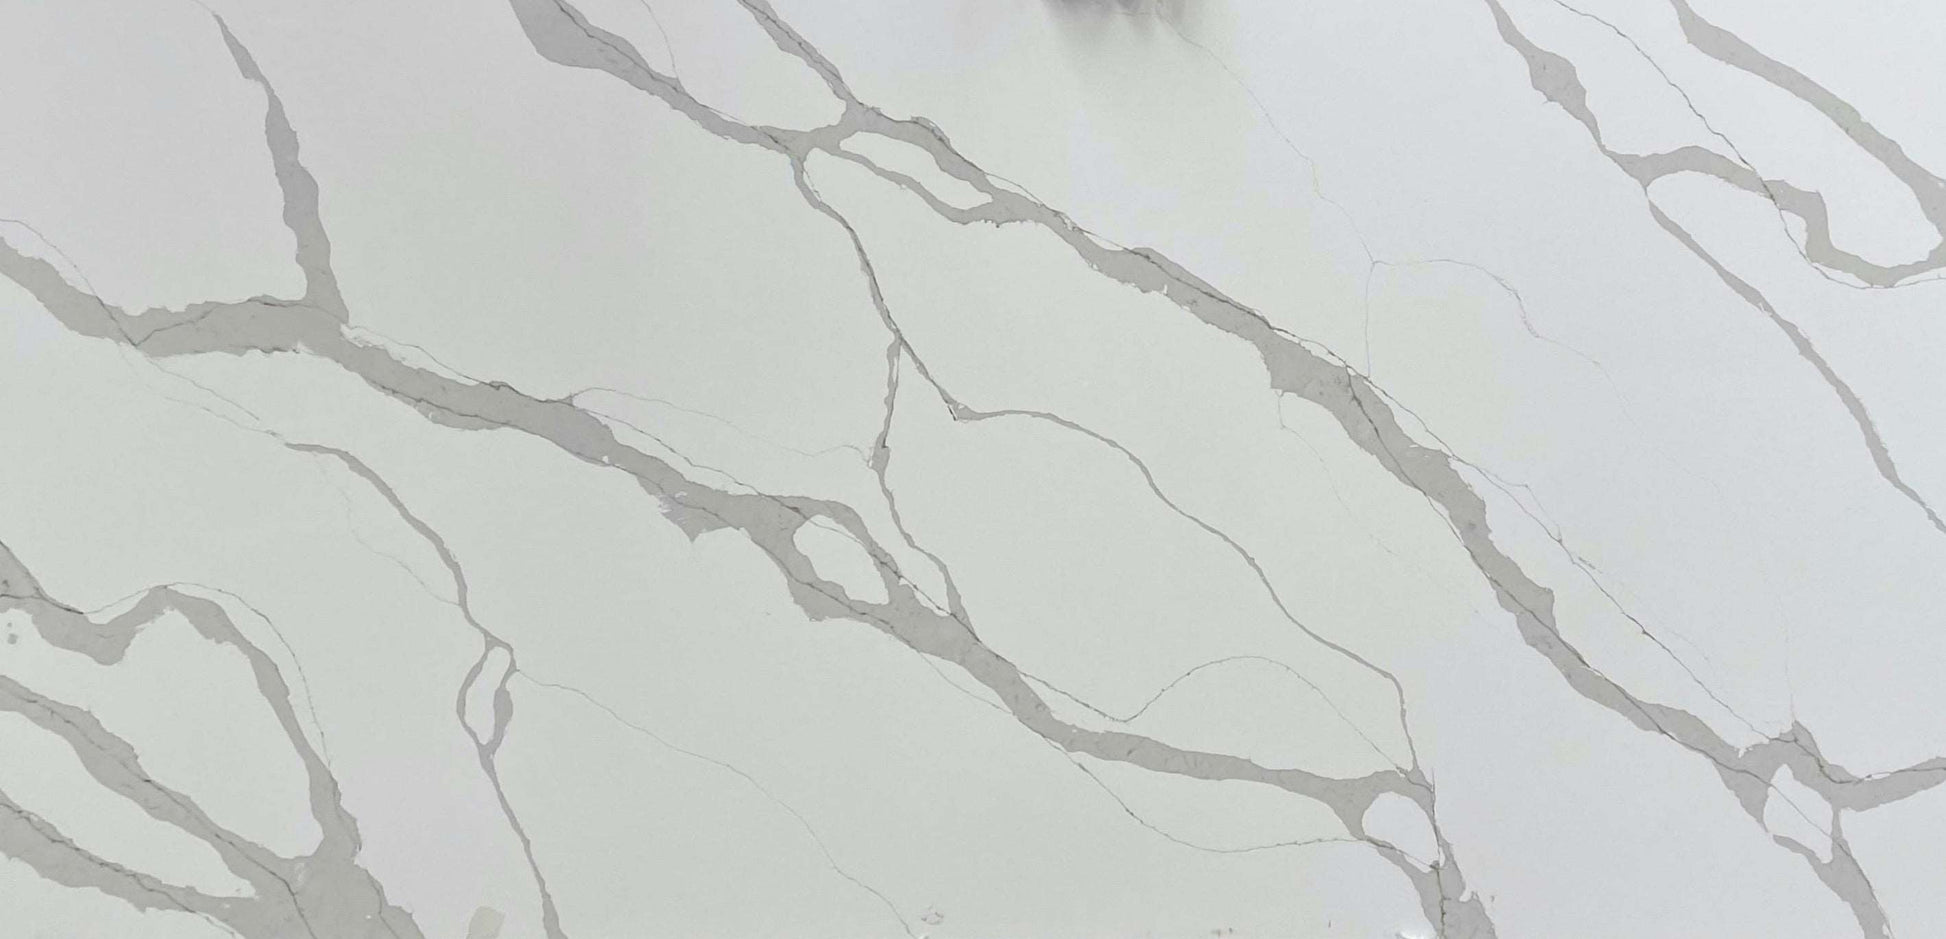 Calacatta Light quartz slab with a light background adorned by a combination of thin and thick grey veins.